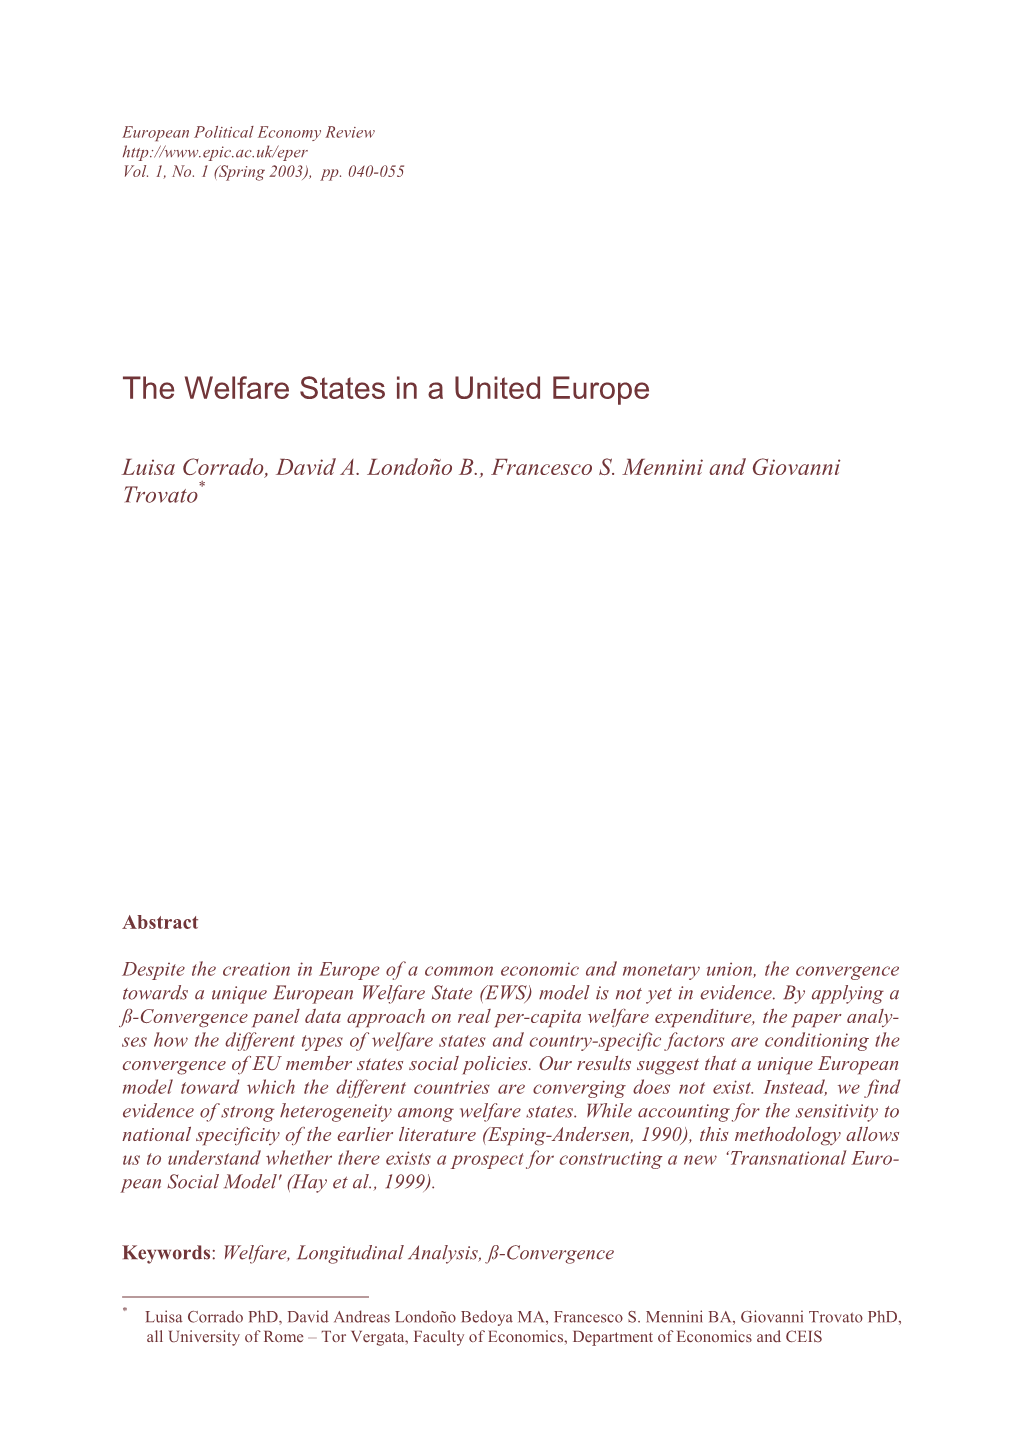 The Welfare States in a United Europe